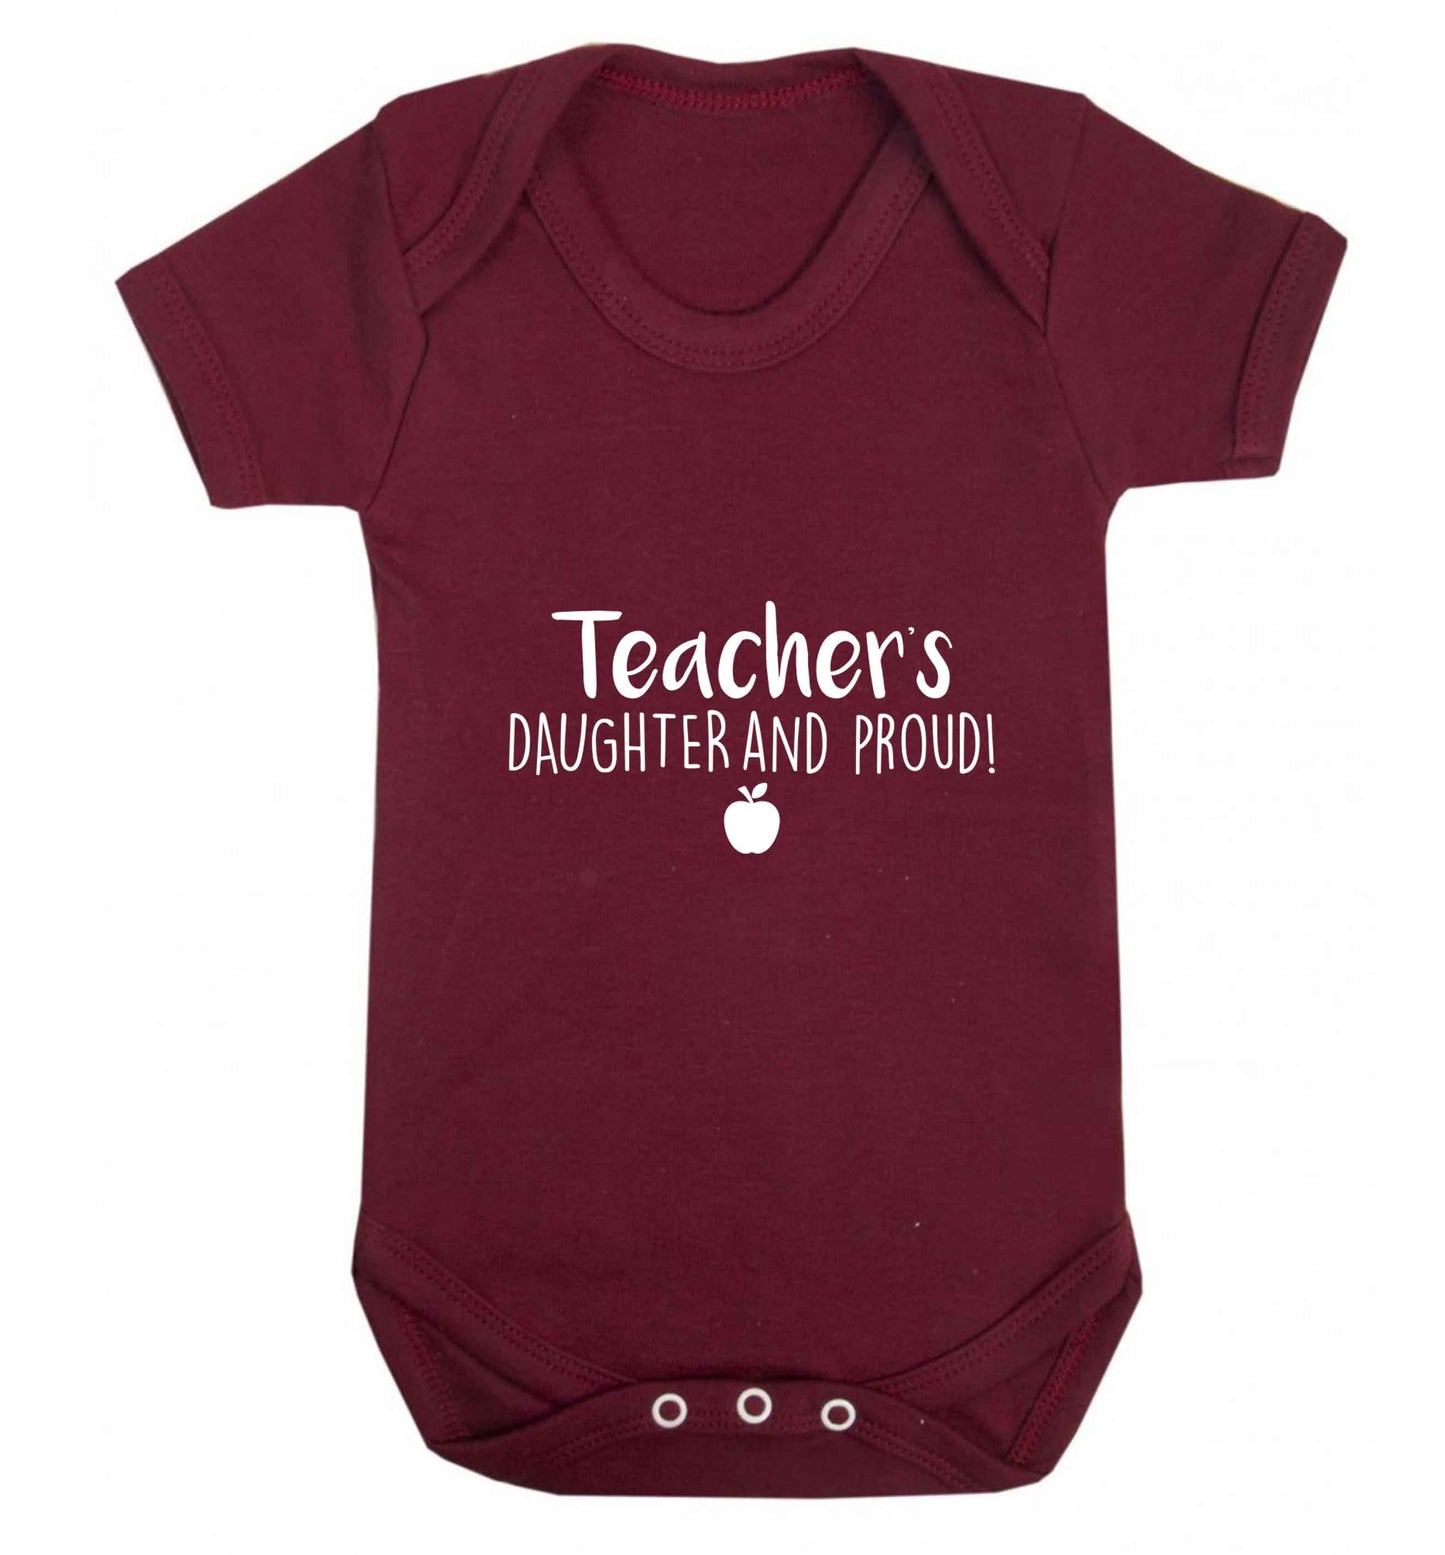 Teachers daughter and proud baby vest maroon 18-24 months